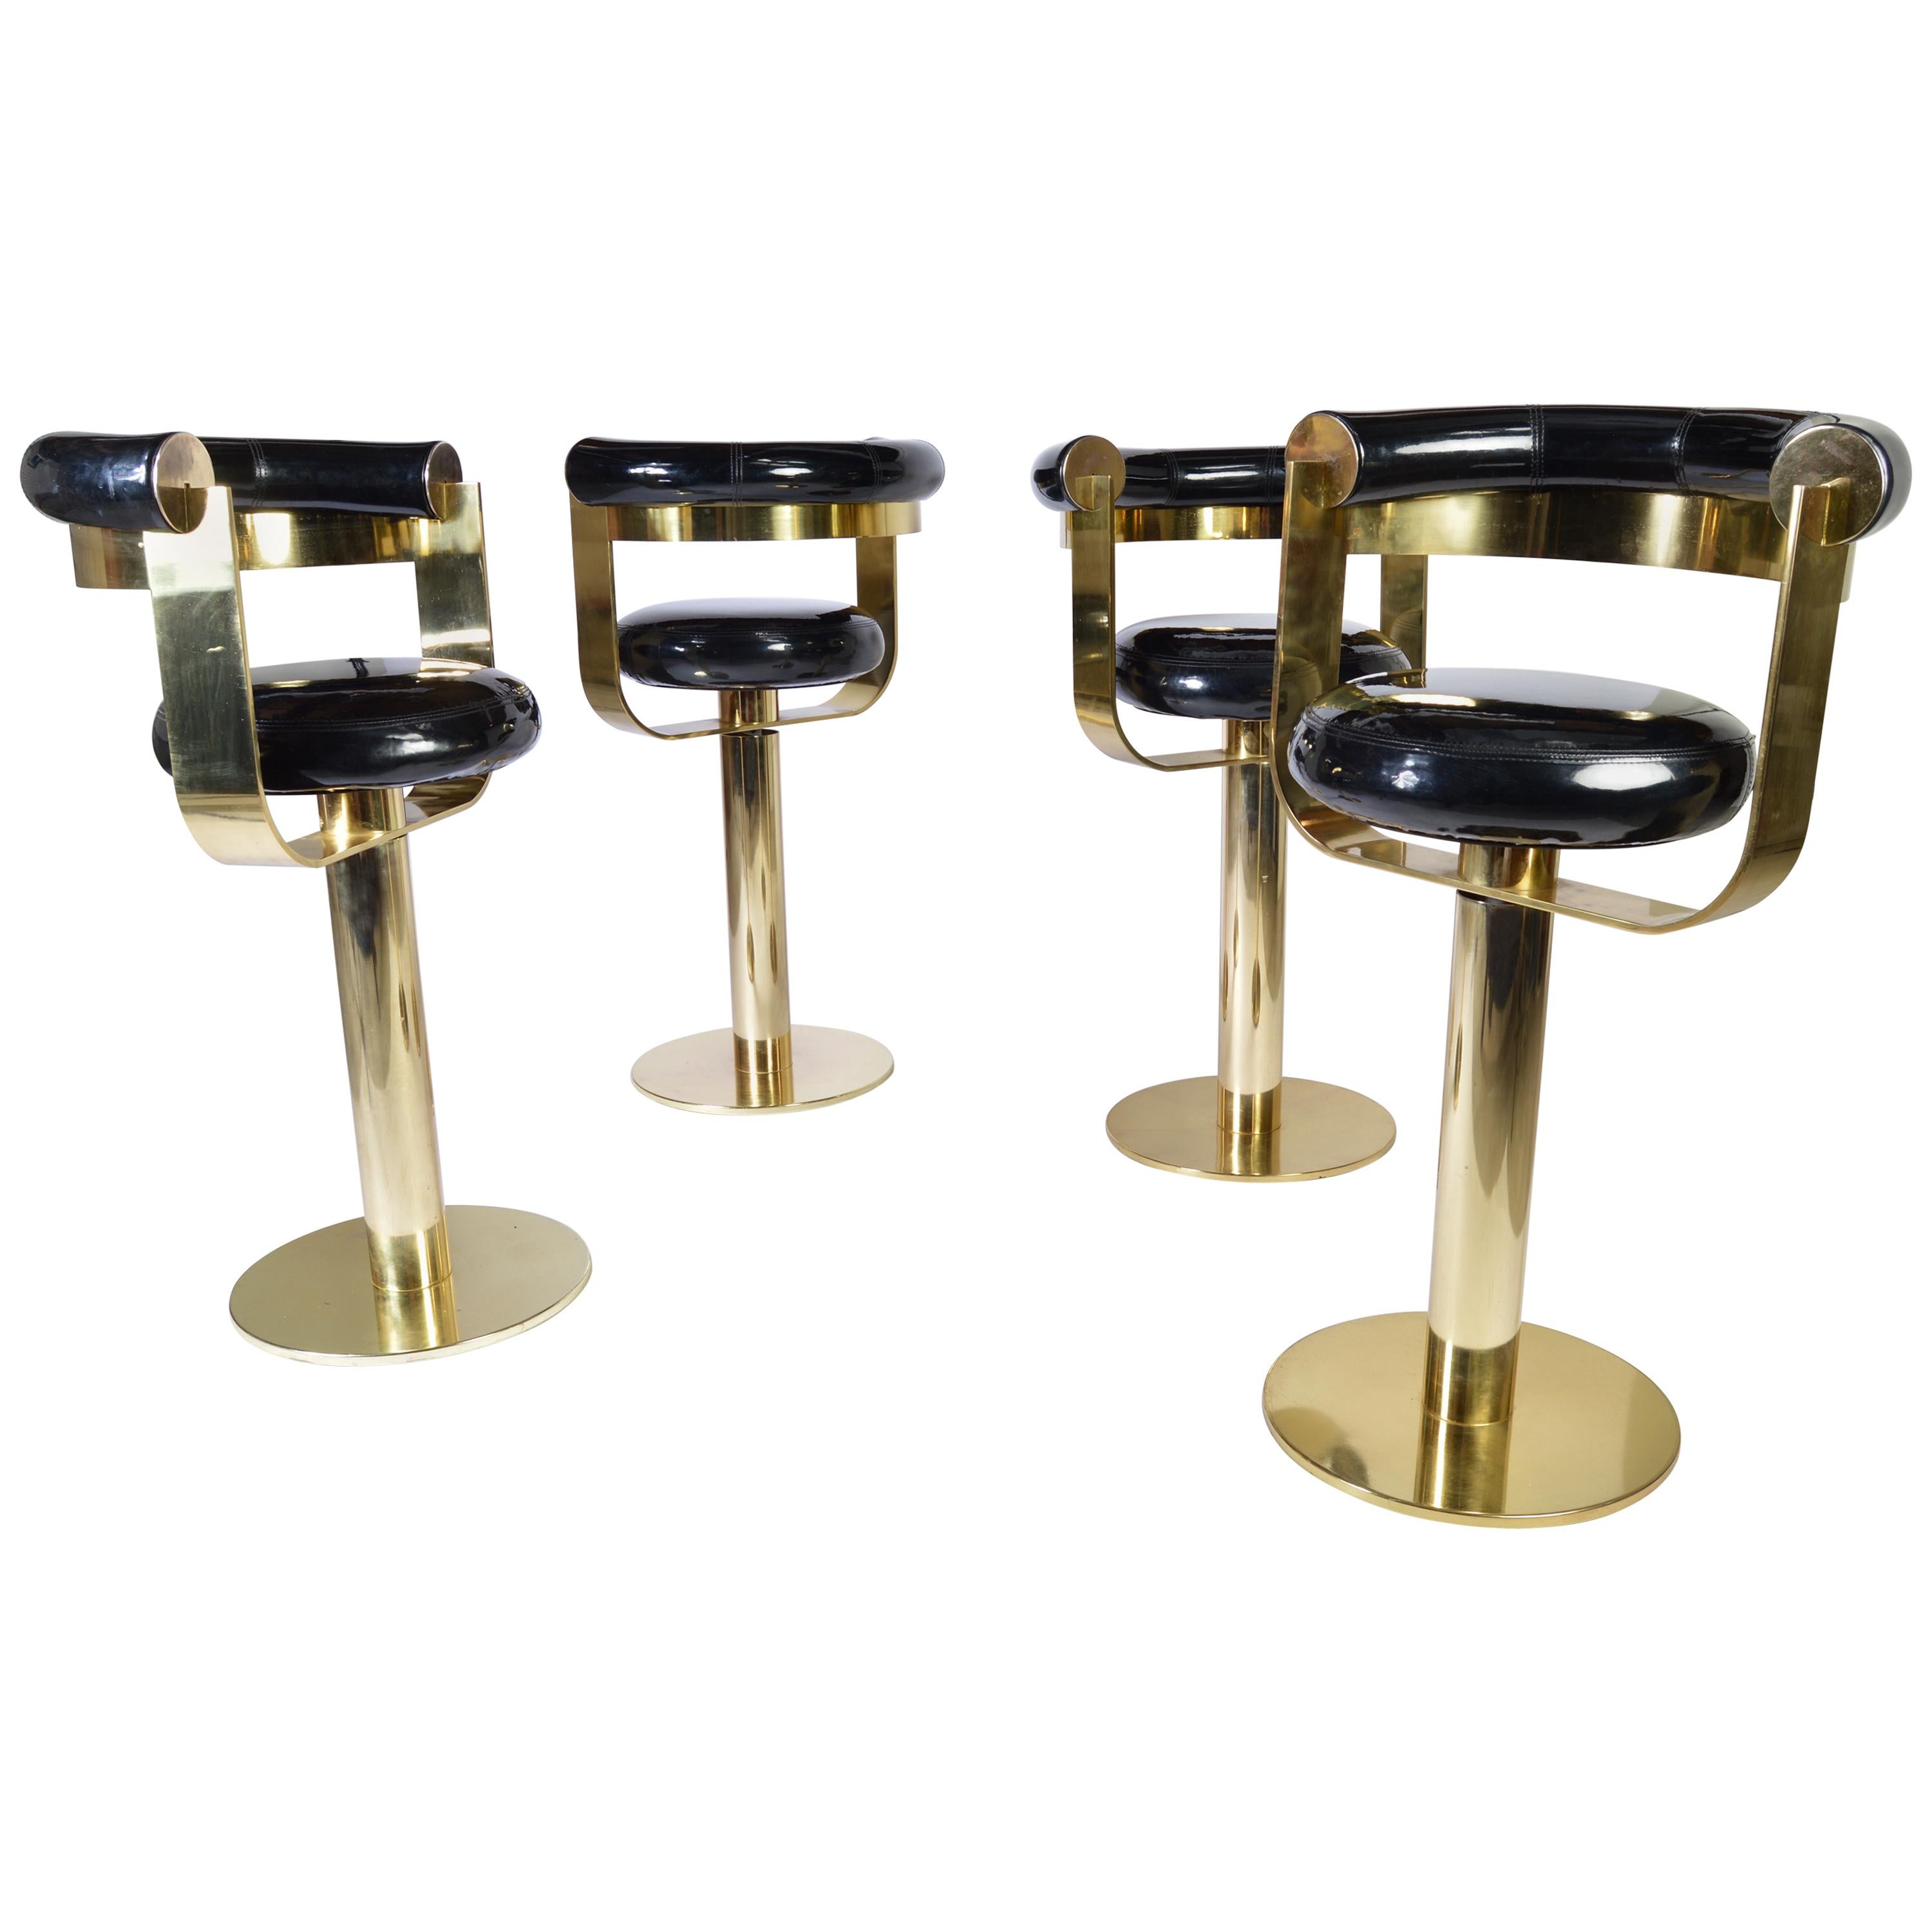 Custom Brass Counter Bar Stools in the Manner of Design For Leisure, circa 1970